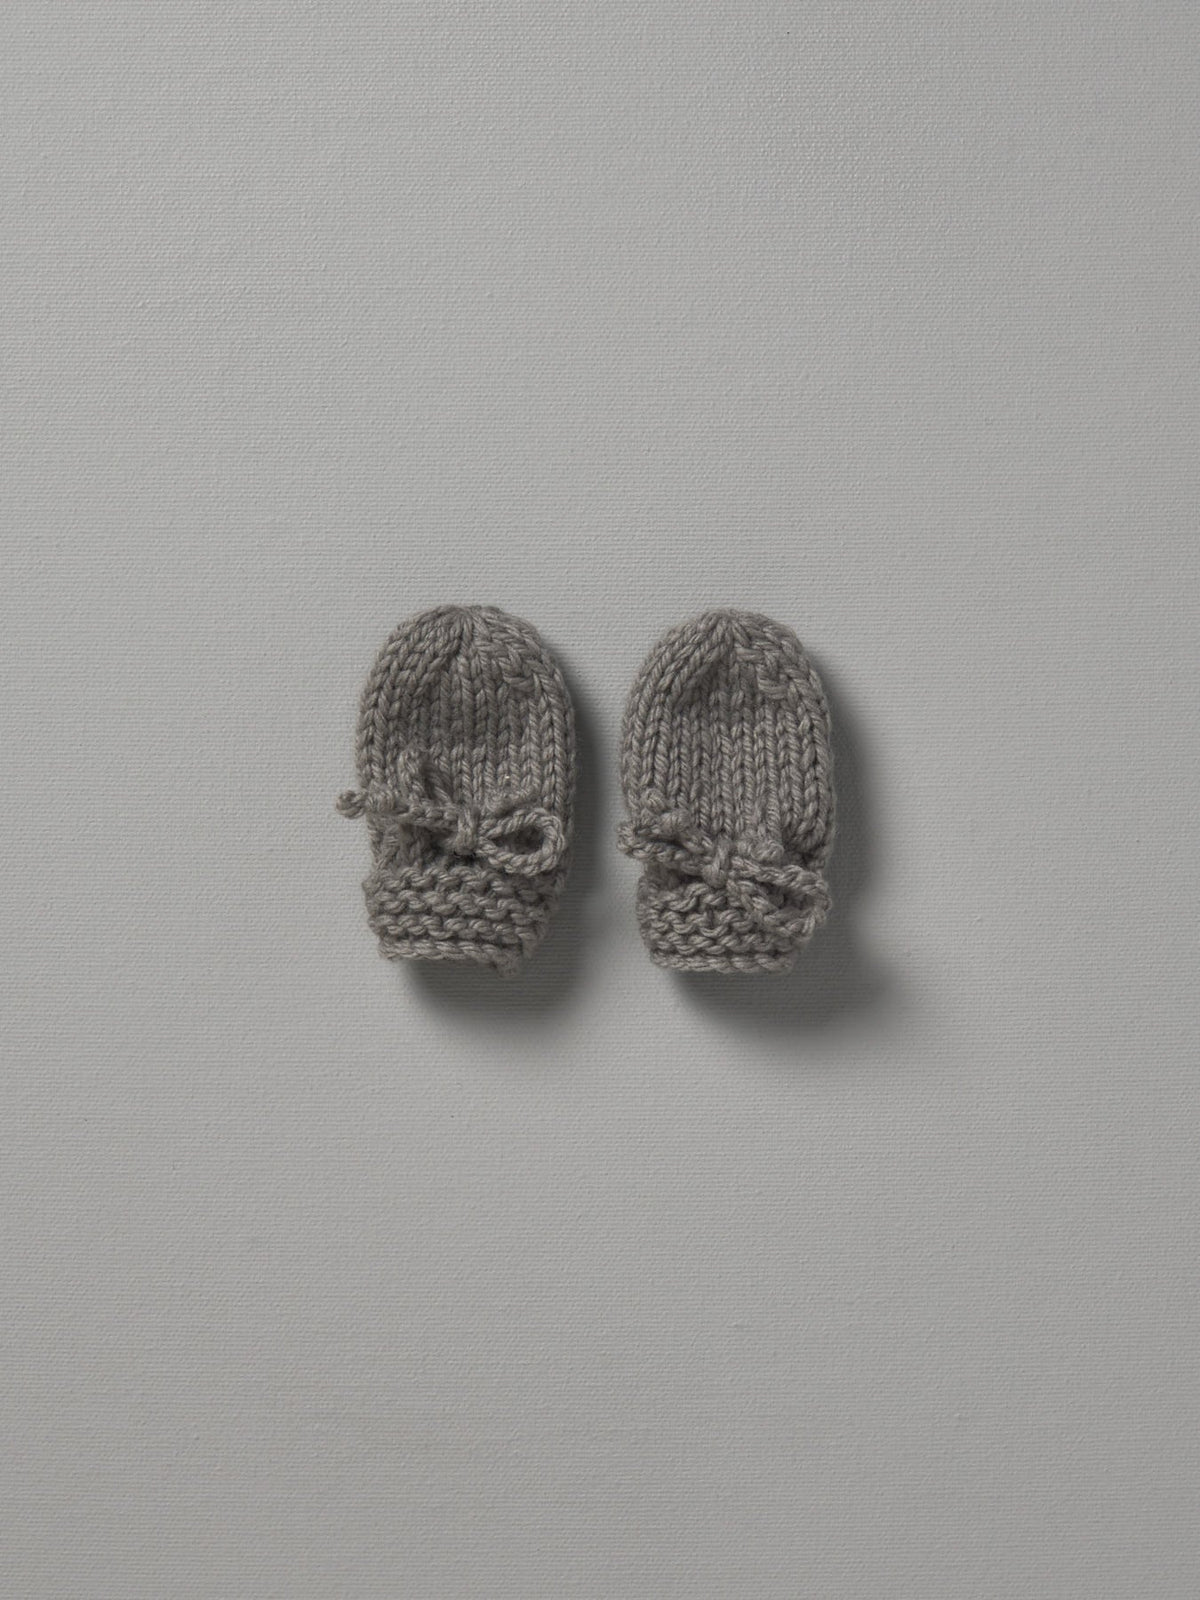 Two Weebits Mushroom hand knitted mittens on a white surface.